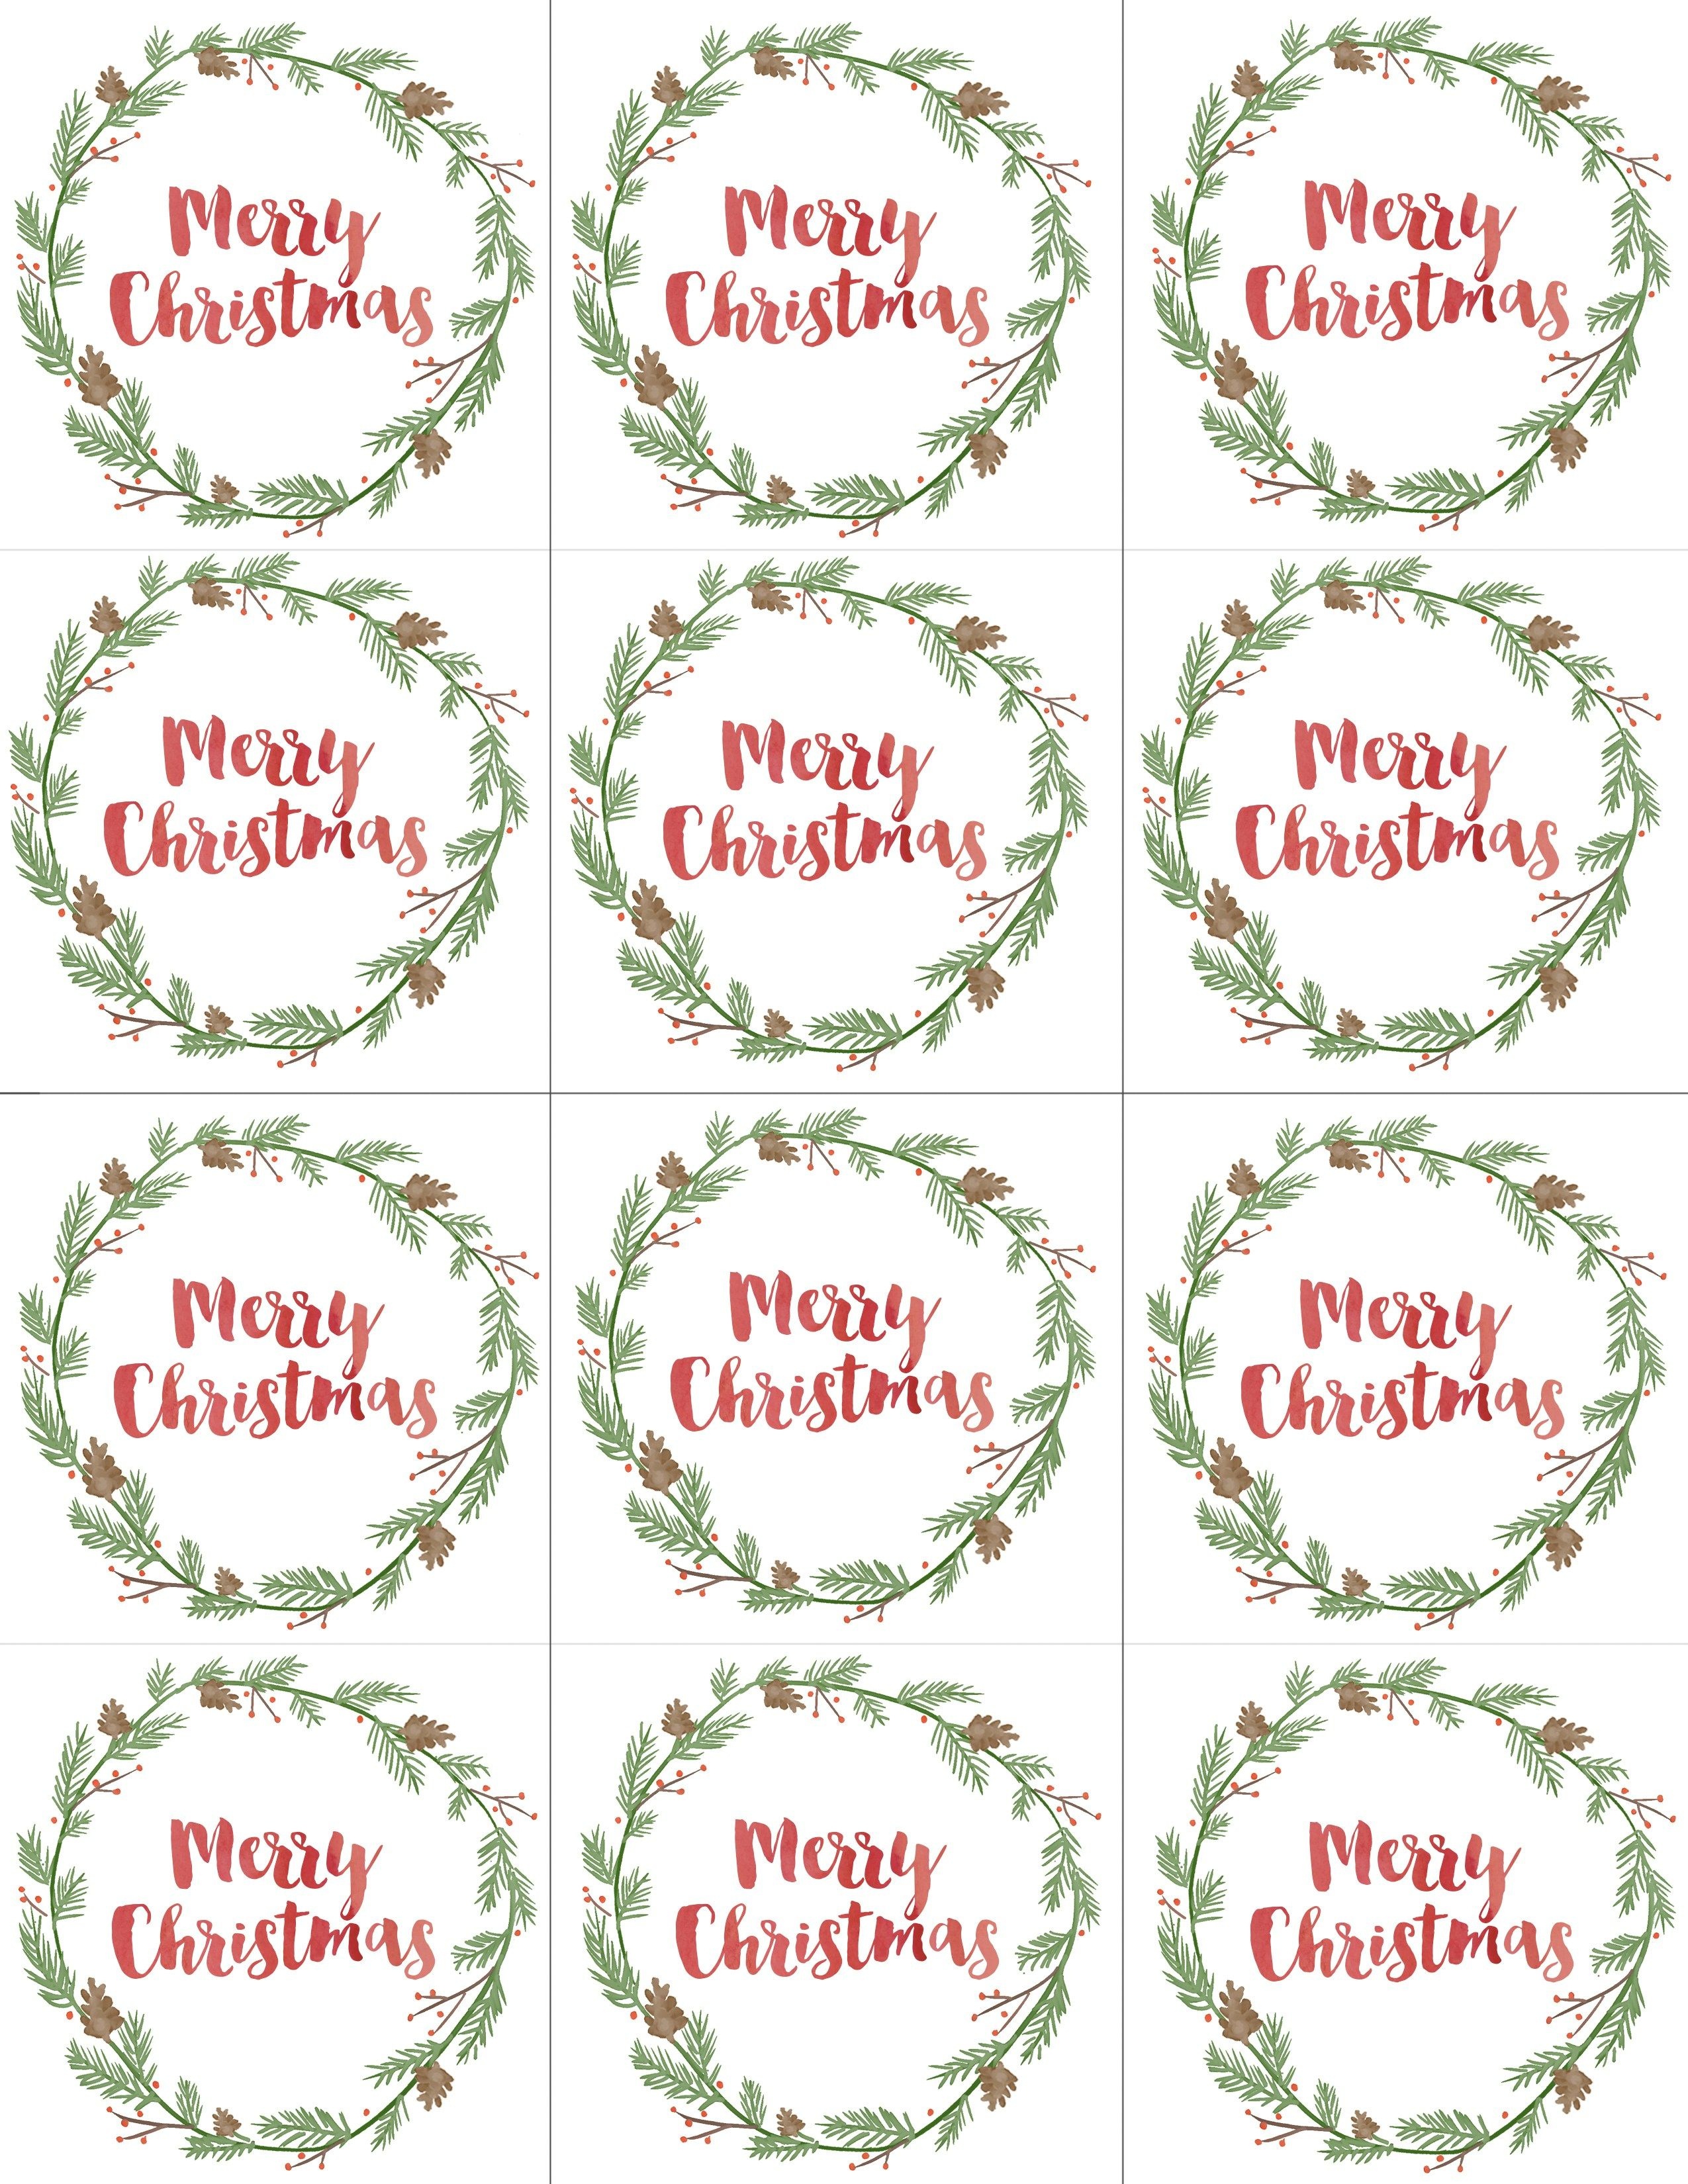 Hand Painted Gift Tags Free Printable | Christmas | Christmas Gift - Free Printable Gift Tags Personalized